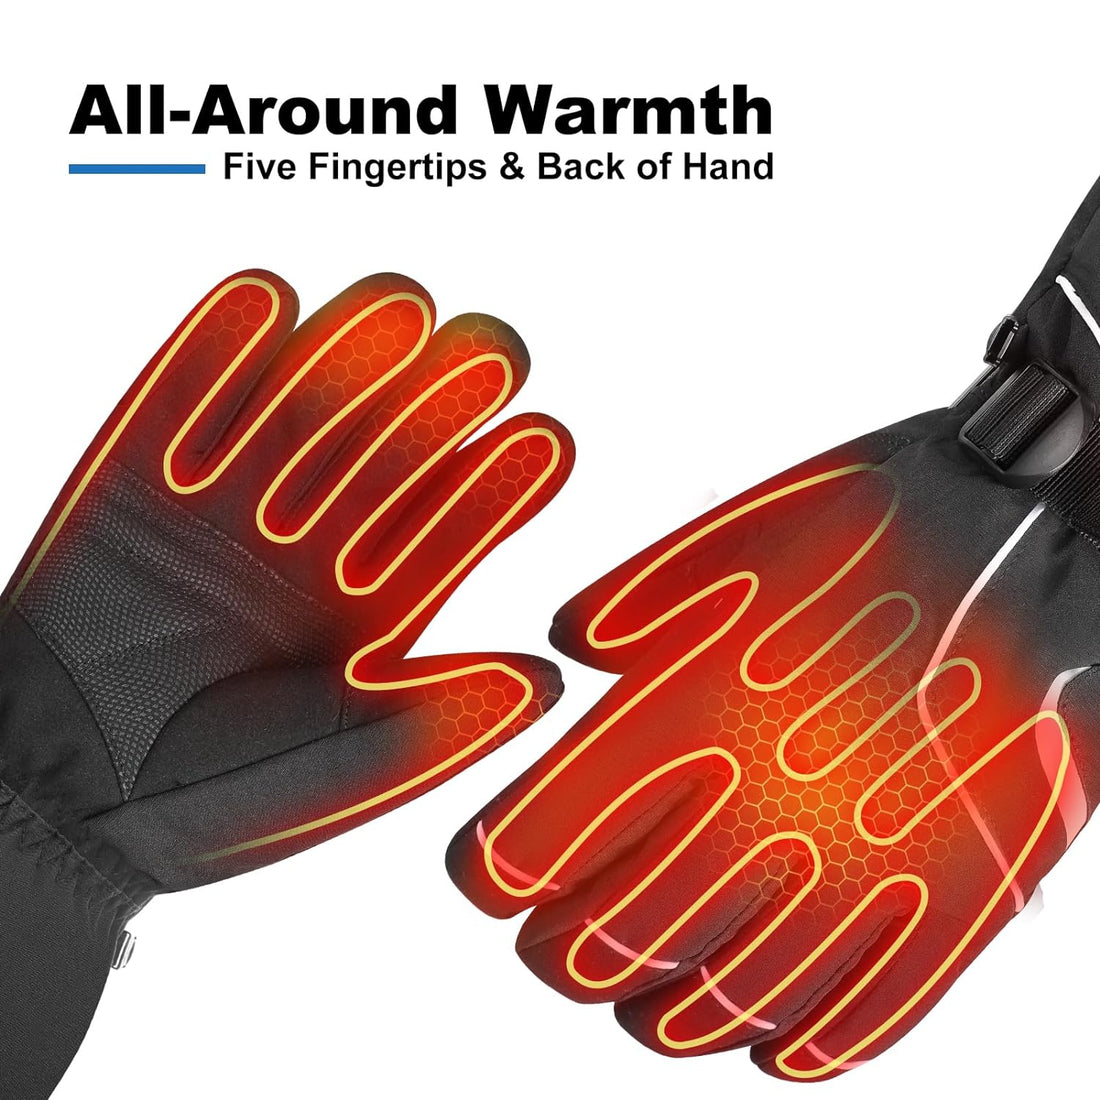 Heated Gloves for Men Women,Winter Gloves Rechargeable Battery Powered Electric Heating Glove,3 Heating Levels Touchscreen Heated Gloves for Skating Hunting Fishing and Other Winter Outdoor Activities